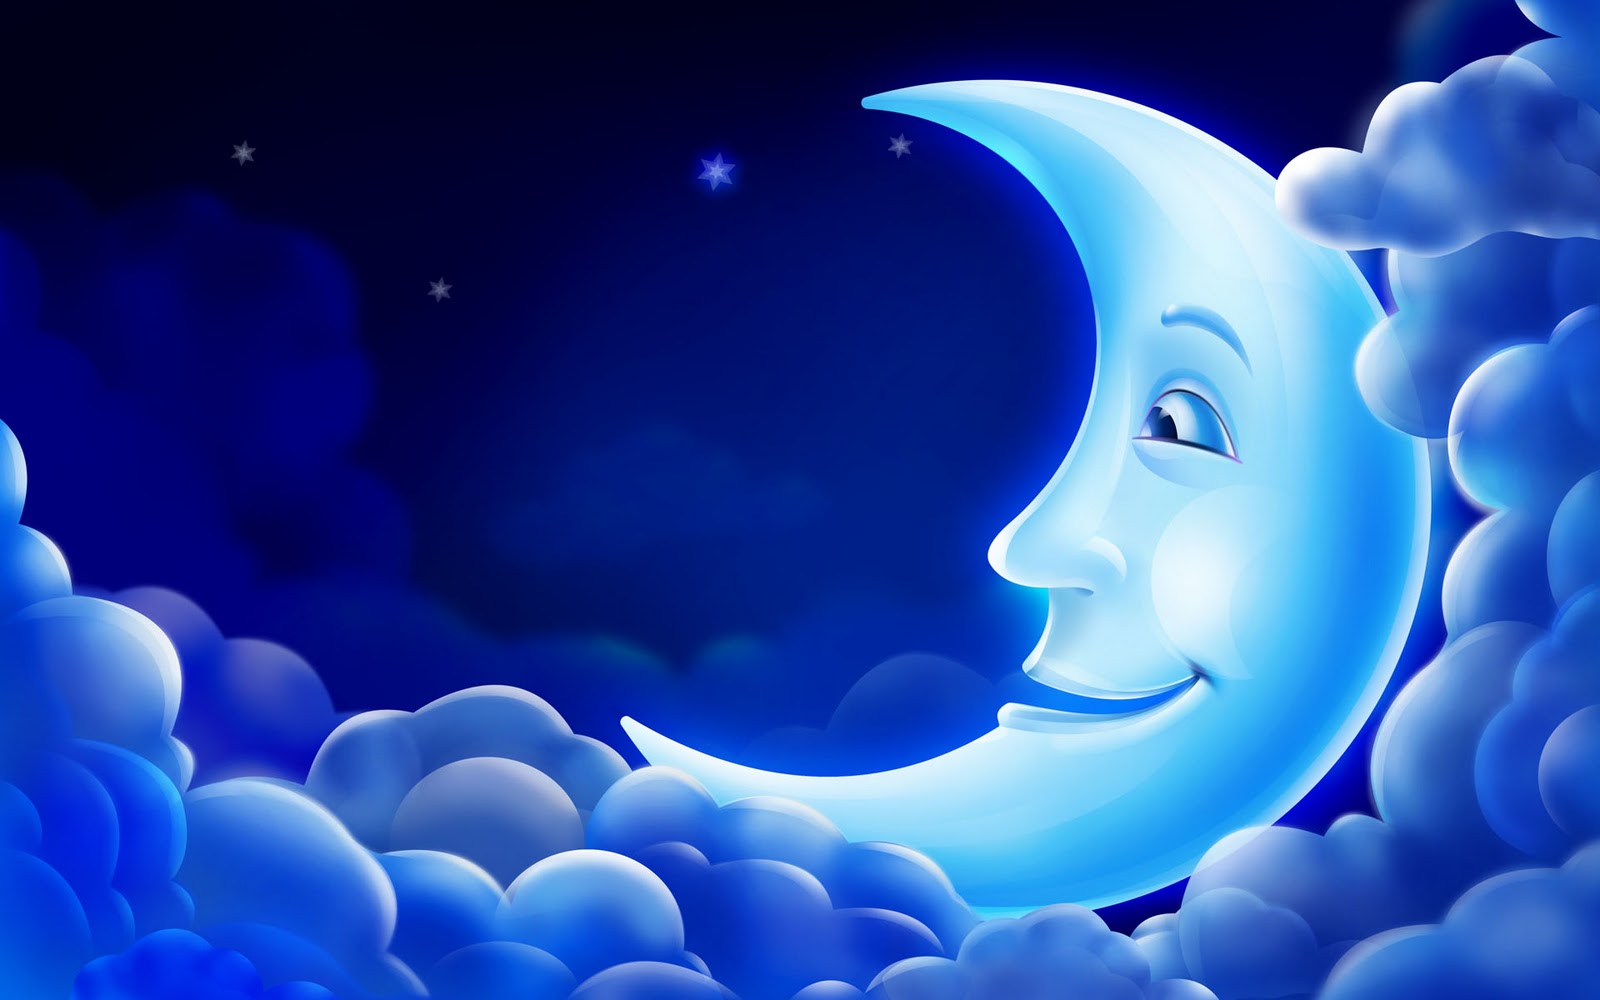 CG 3D Animation PC Background blue moon smile sky star wallpapers